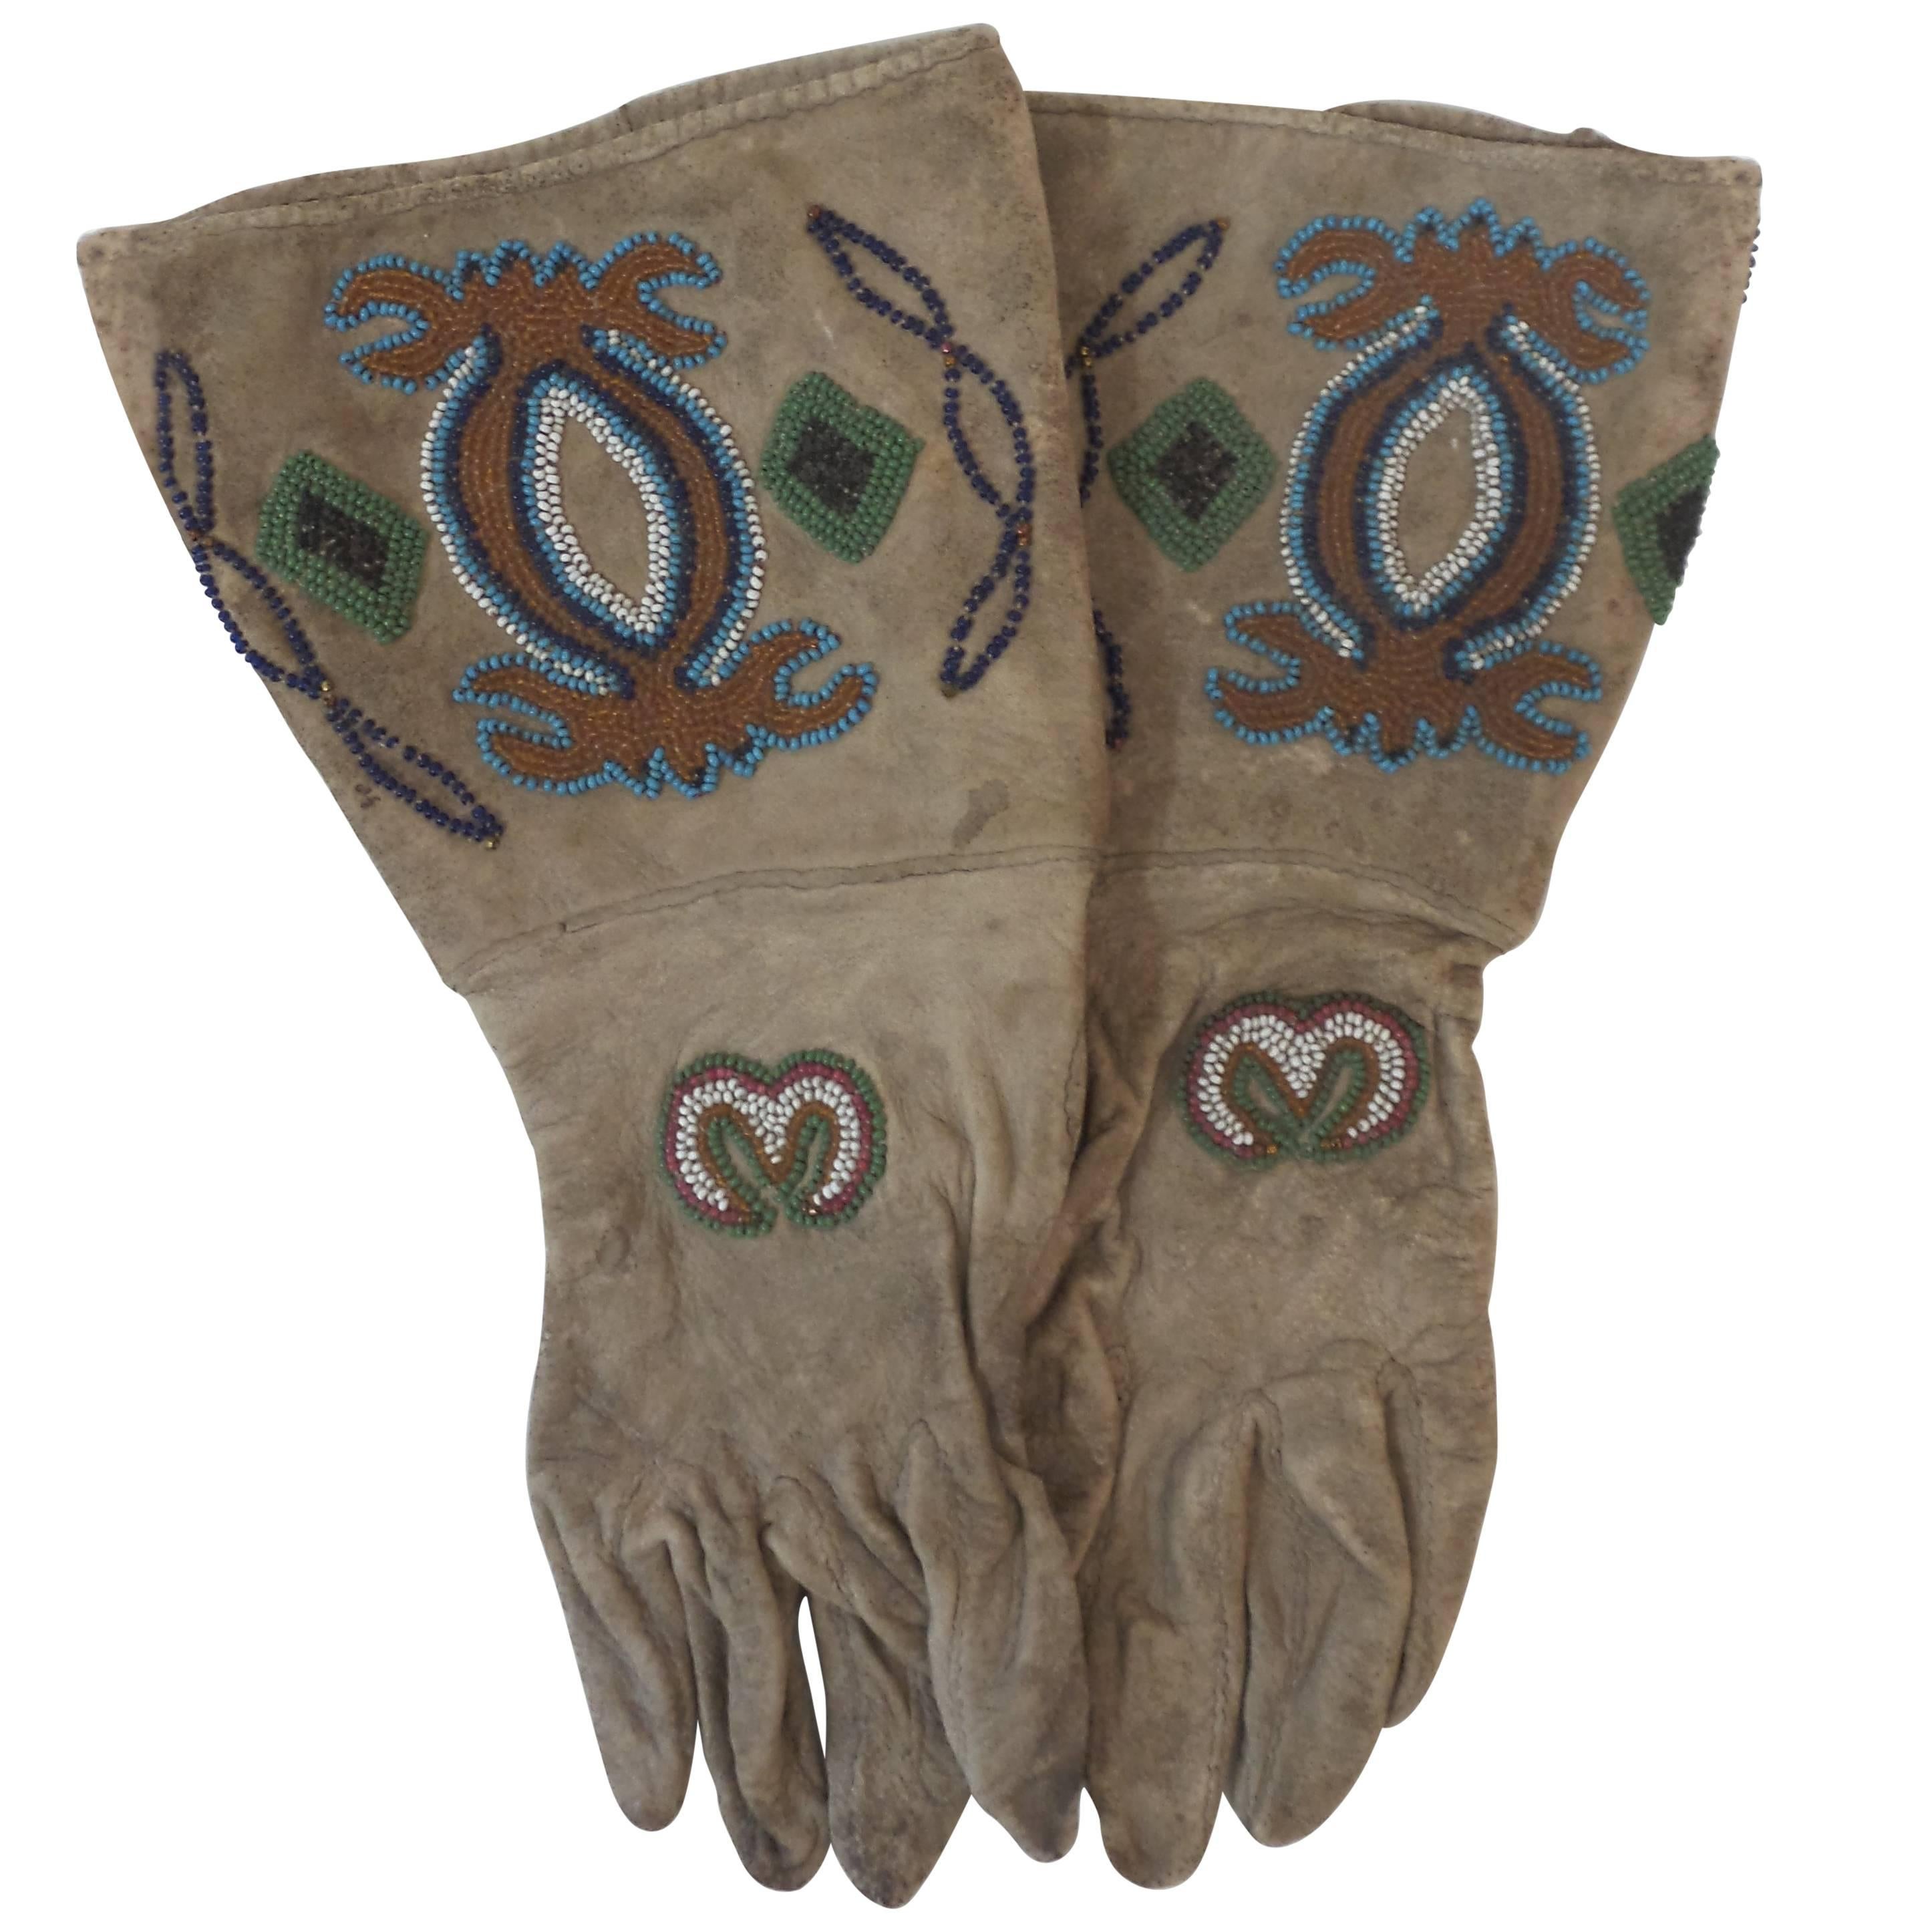 19th Century Native American Beaded Gloves, likely for a woman.